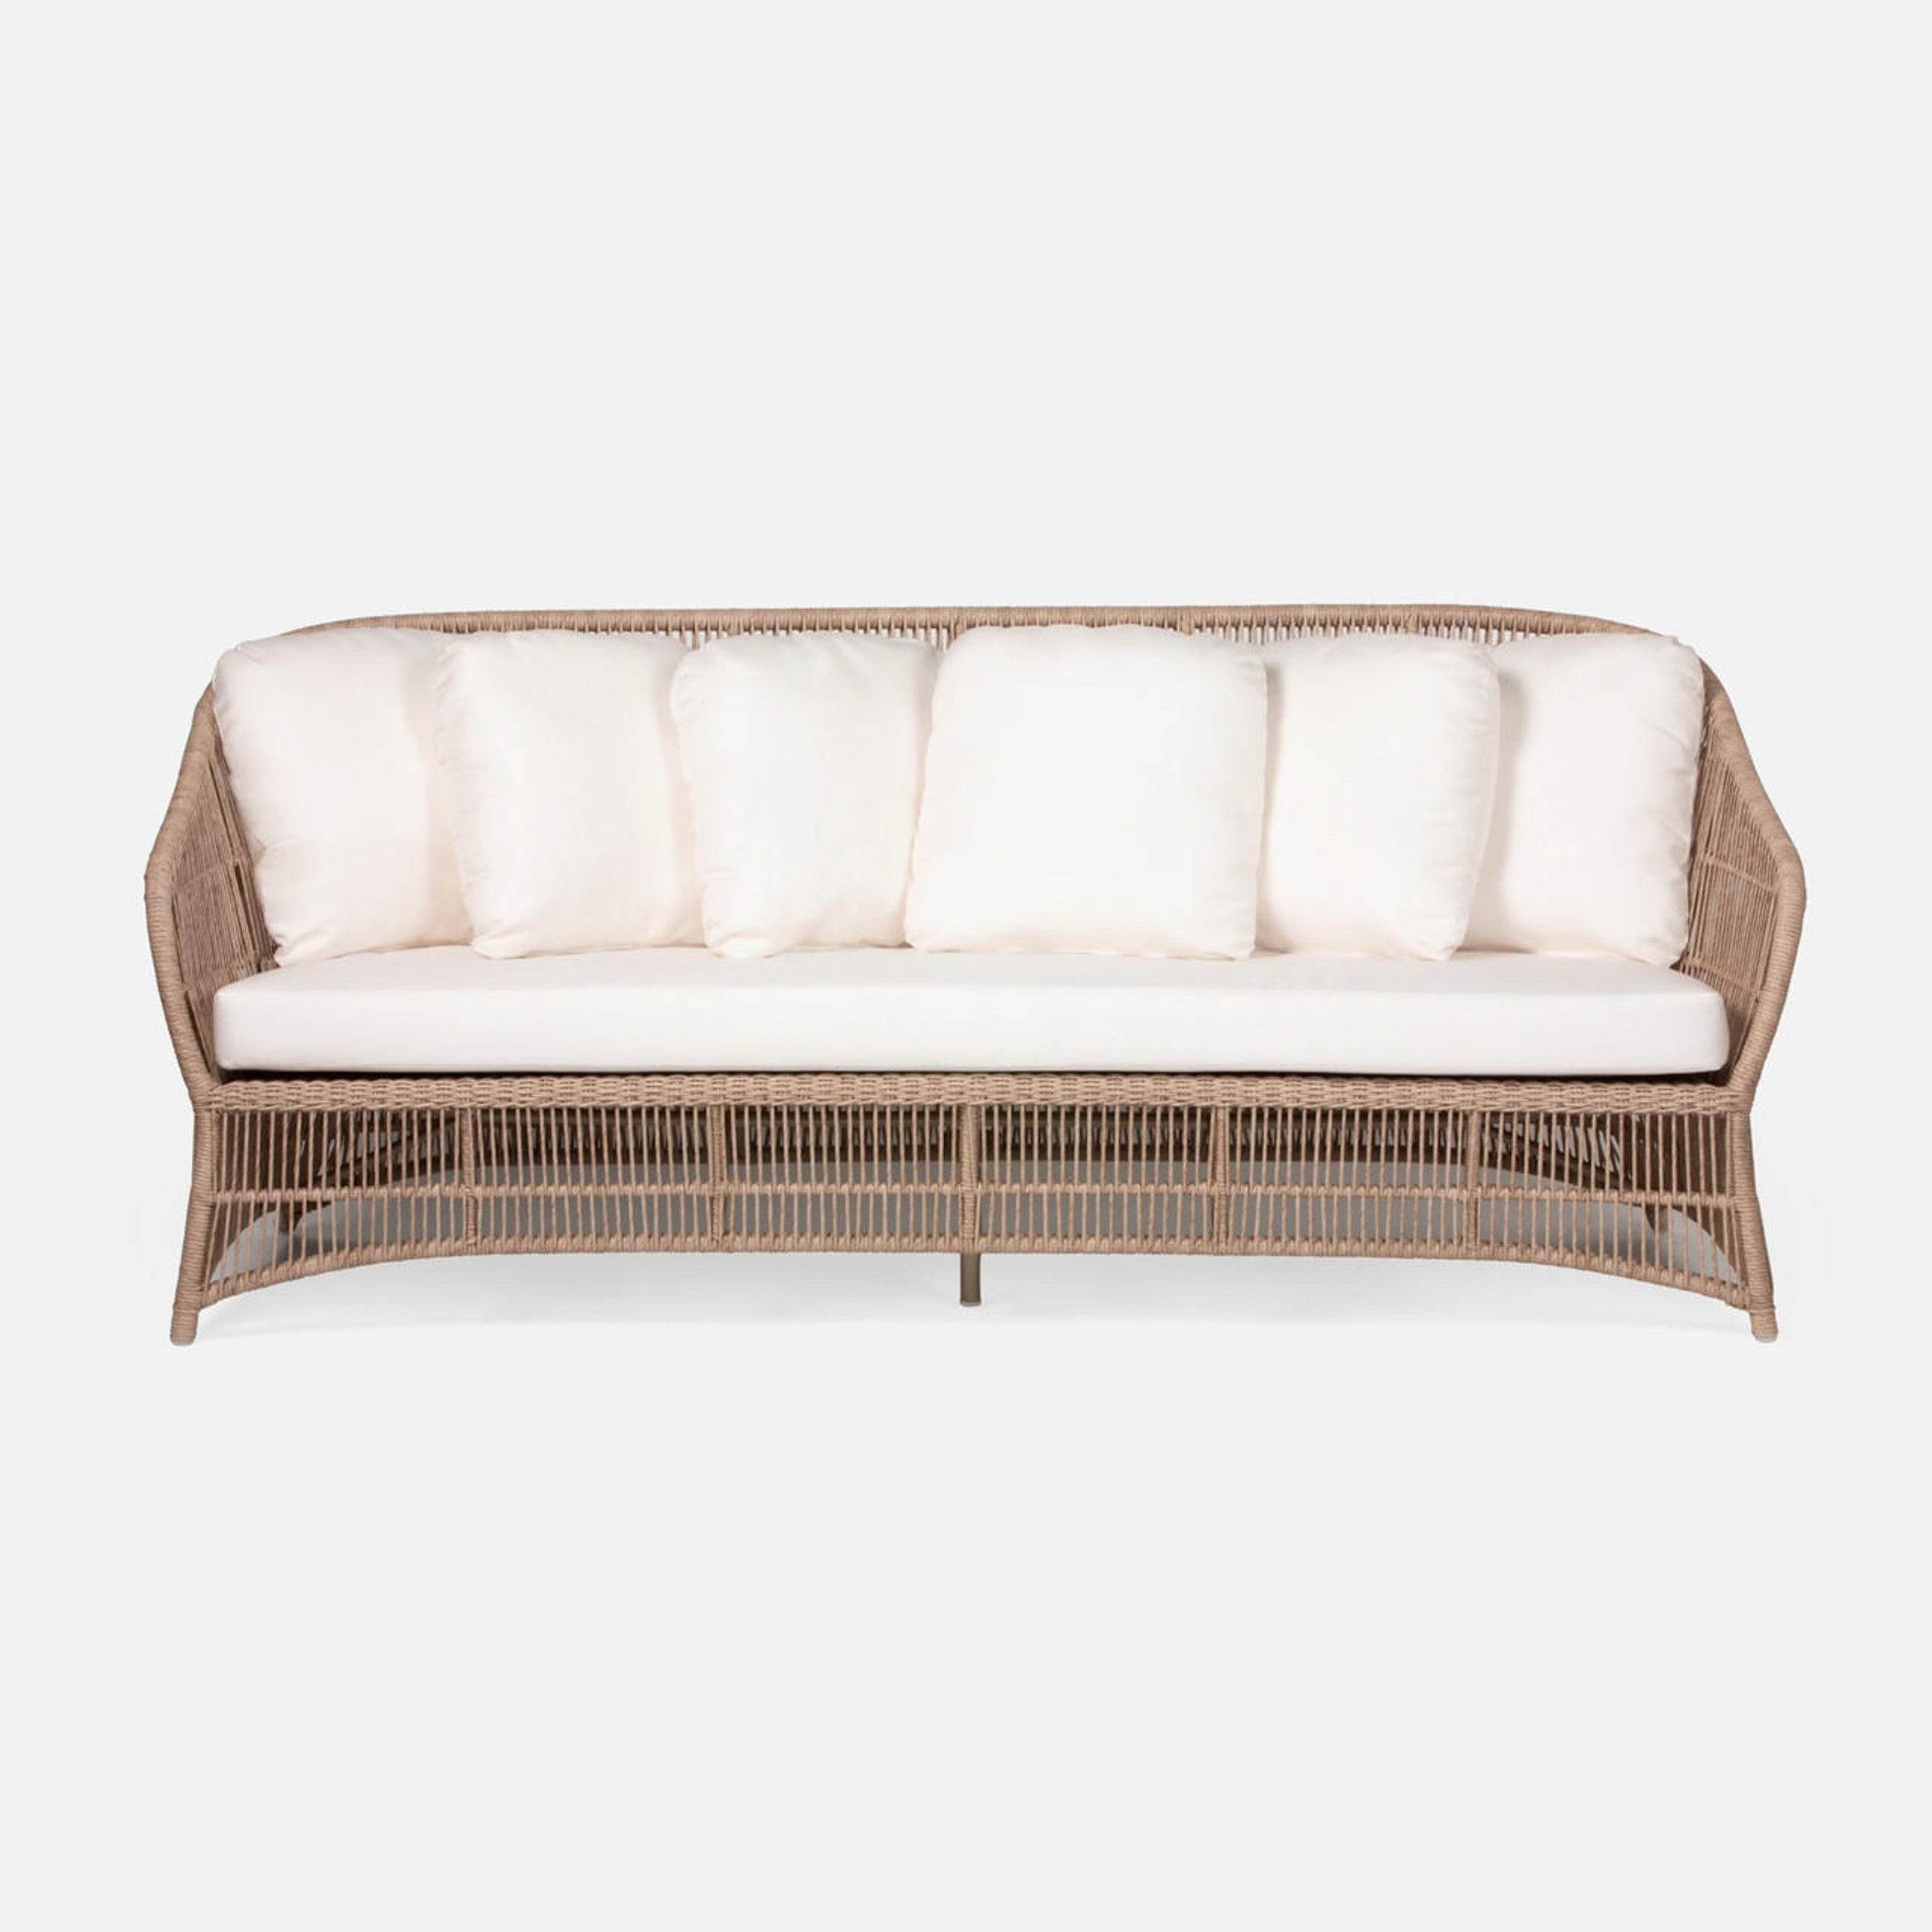 Soma Natural Outdoor Sofa (Interchangeable Cushions)
                    
    
        
    
    ... | Belle and June